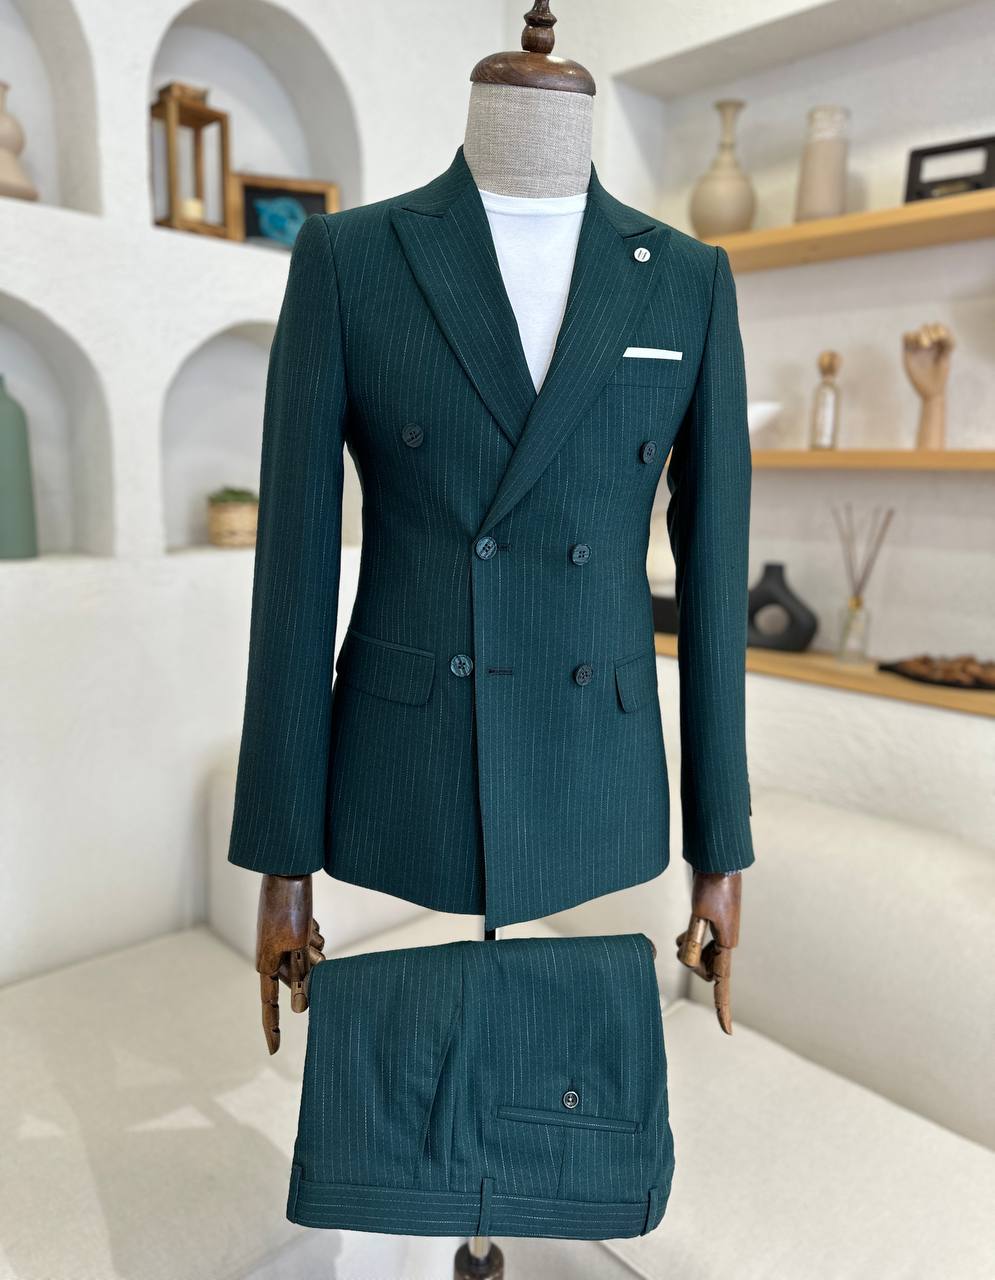 Green Ivy Pinstripe Double Breasted Suit